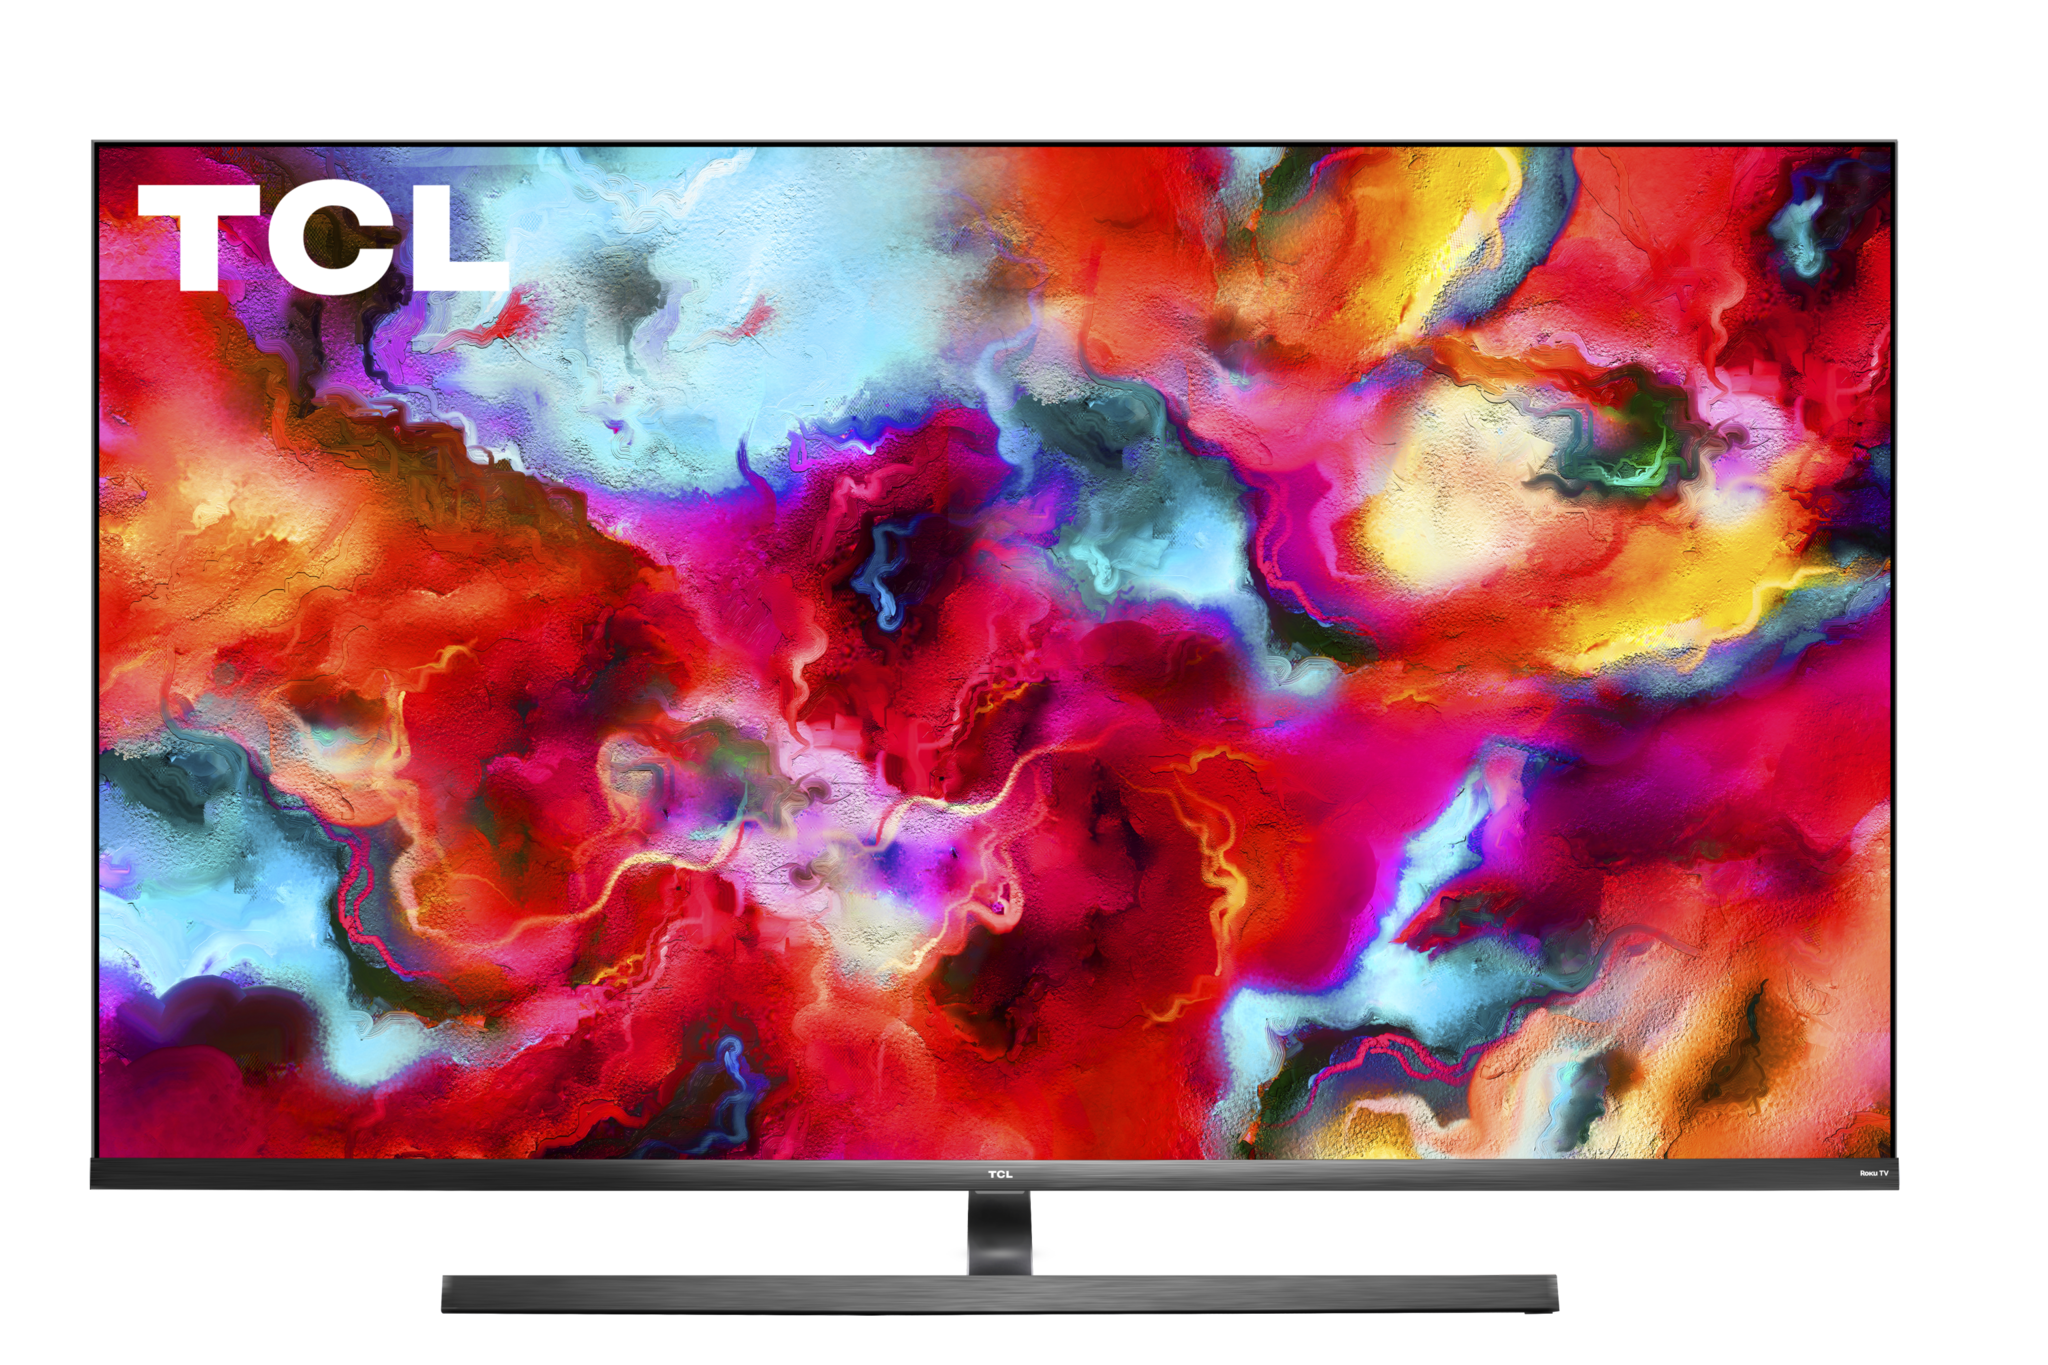 TCL Drops Prices on 8 Series TVs for One-Day Sales This Week